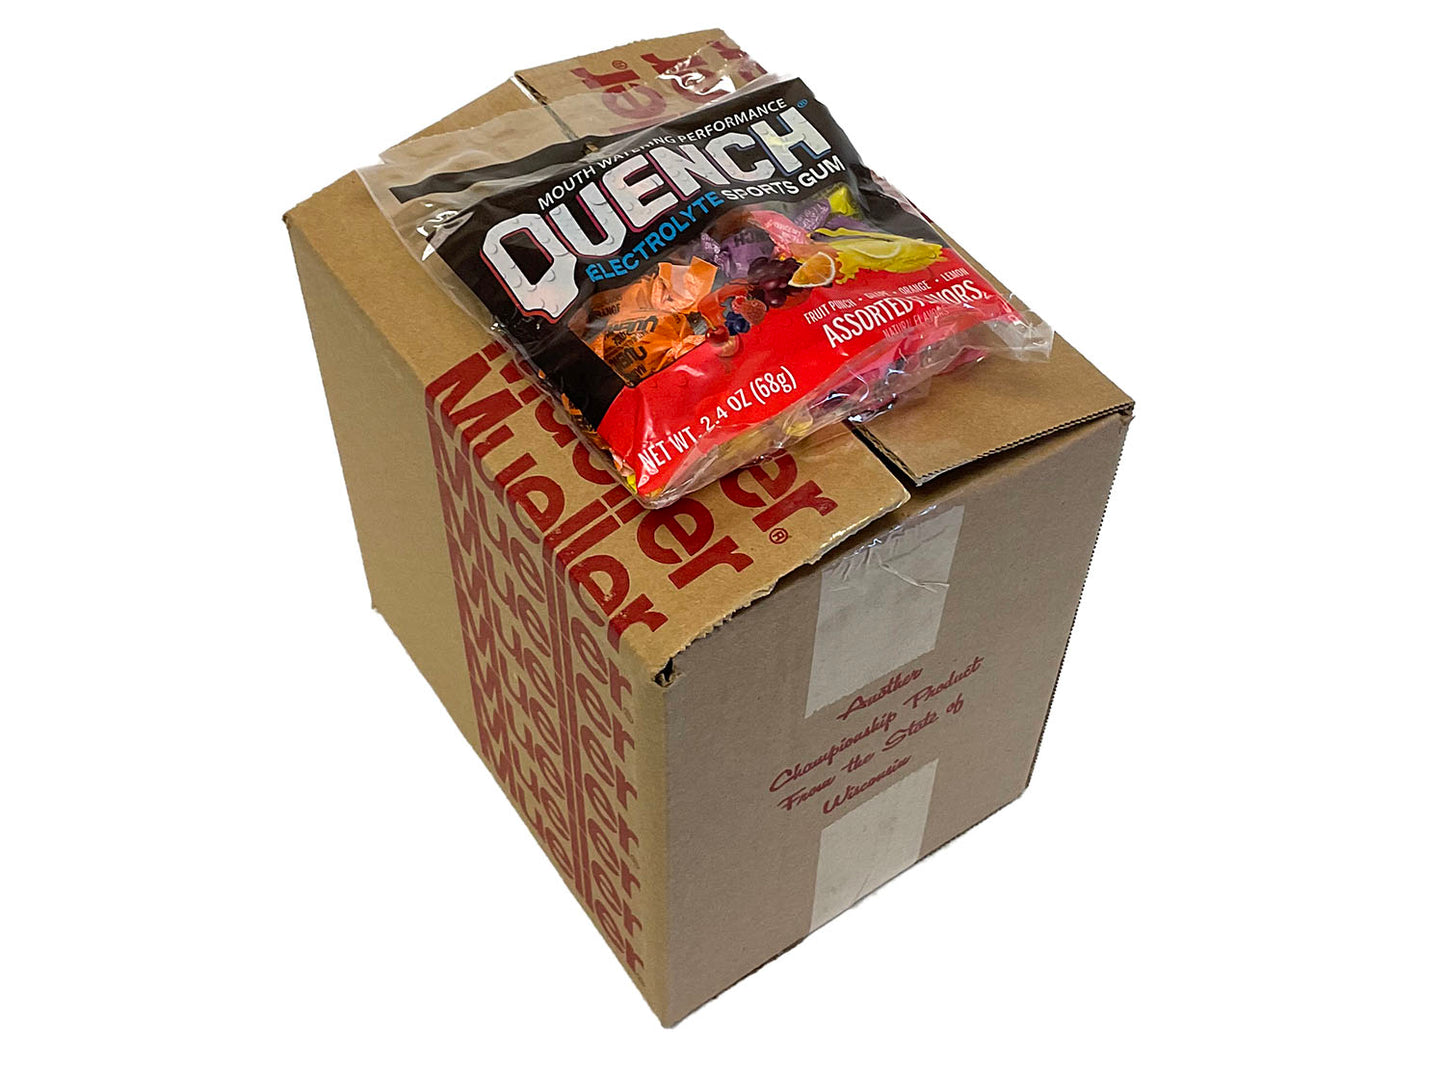 Quench Gum Assorted Flavors - 2.4 oz bag - box of 12